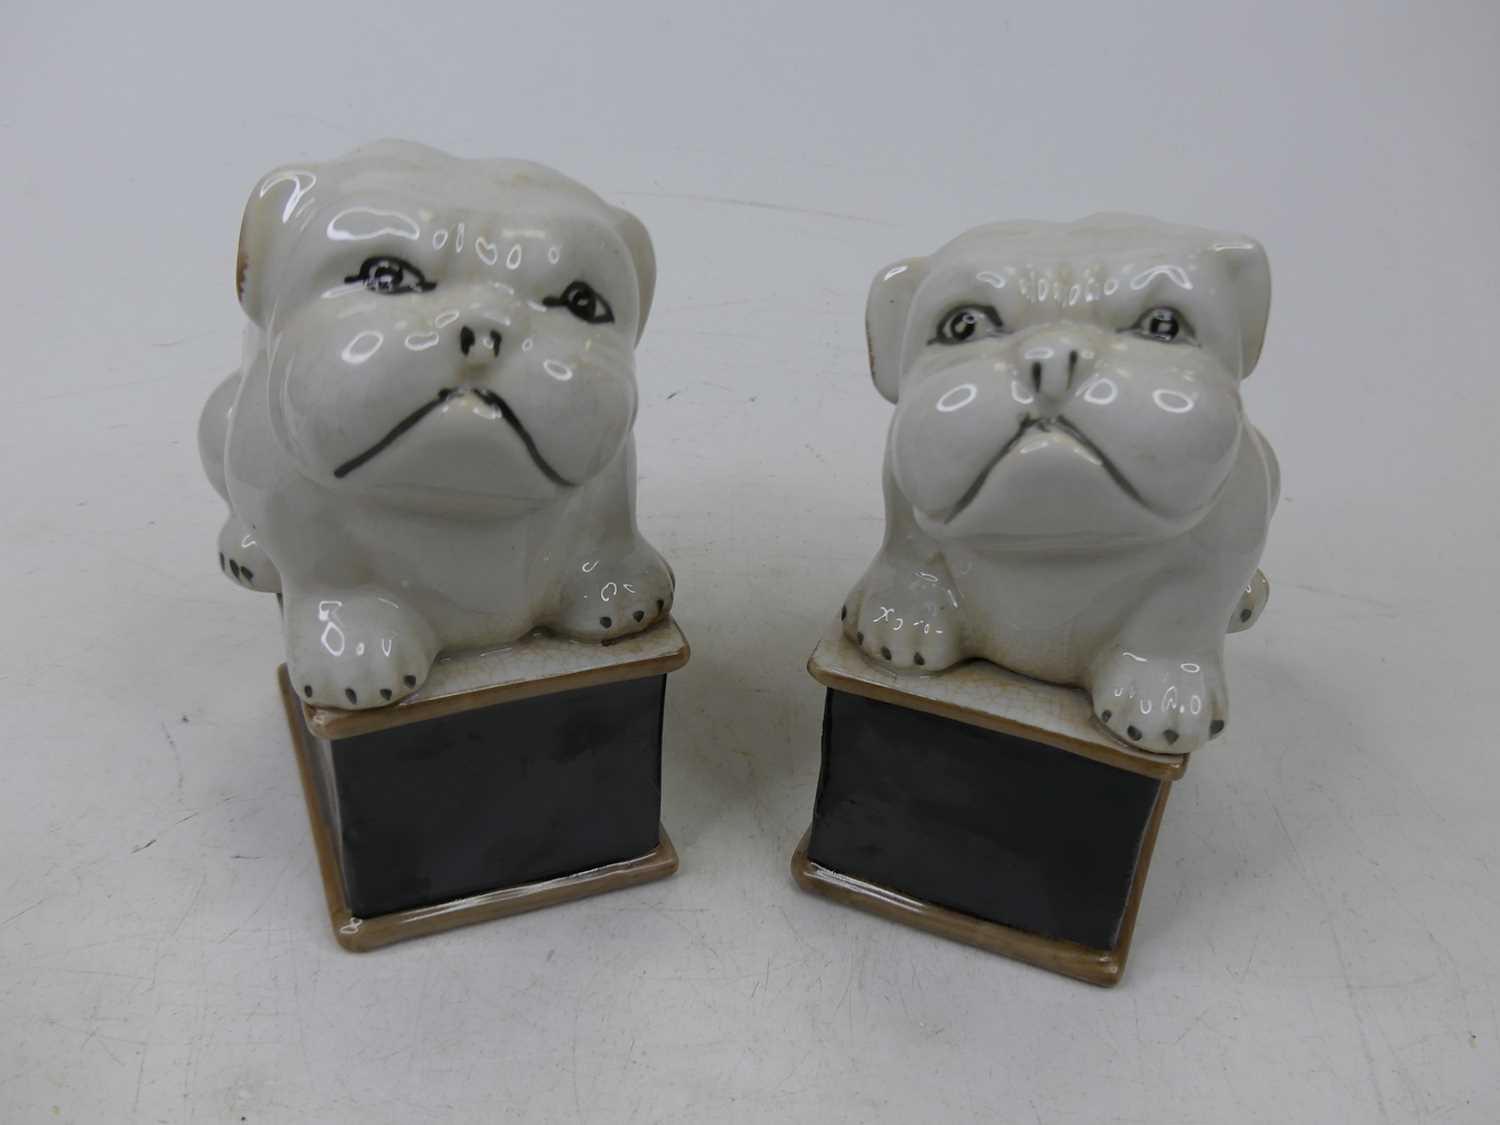 A pair of porcelain figures of bulldogs, each shown seated on a plinth, height 15cm